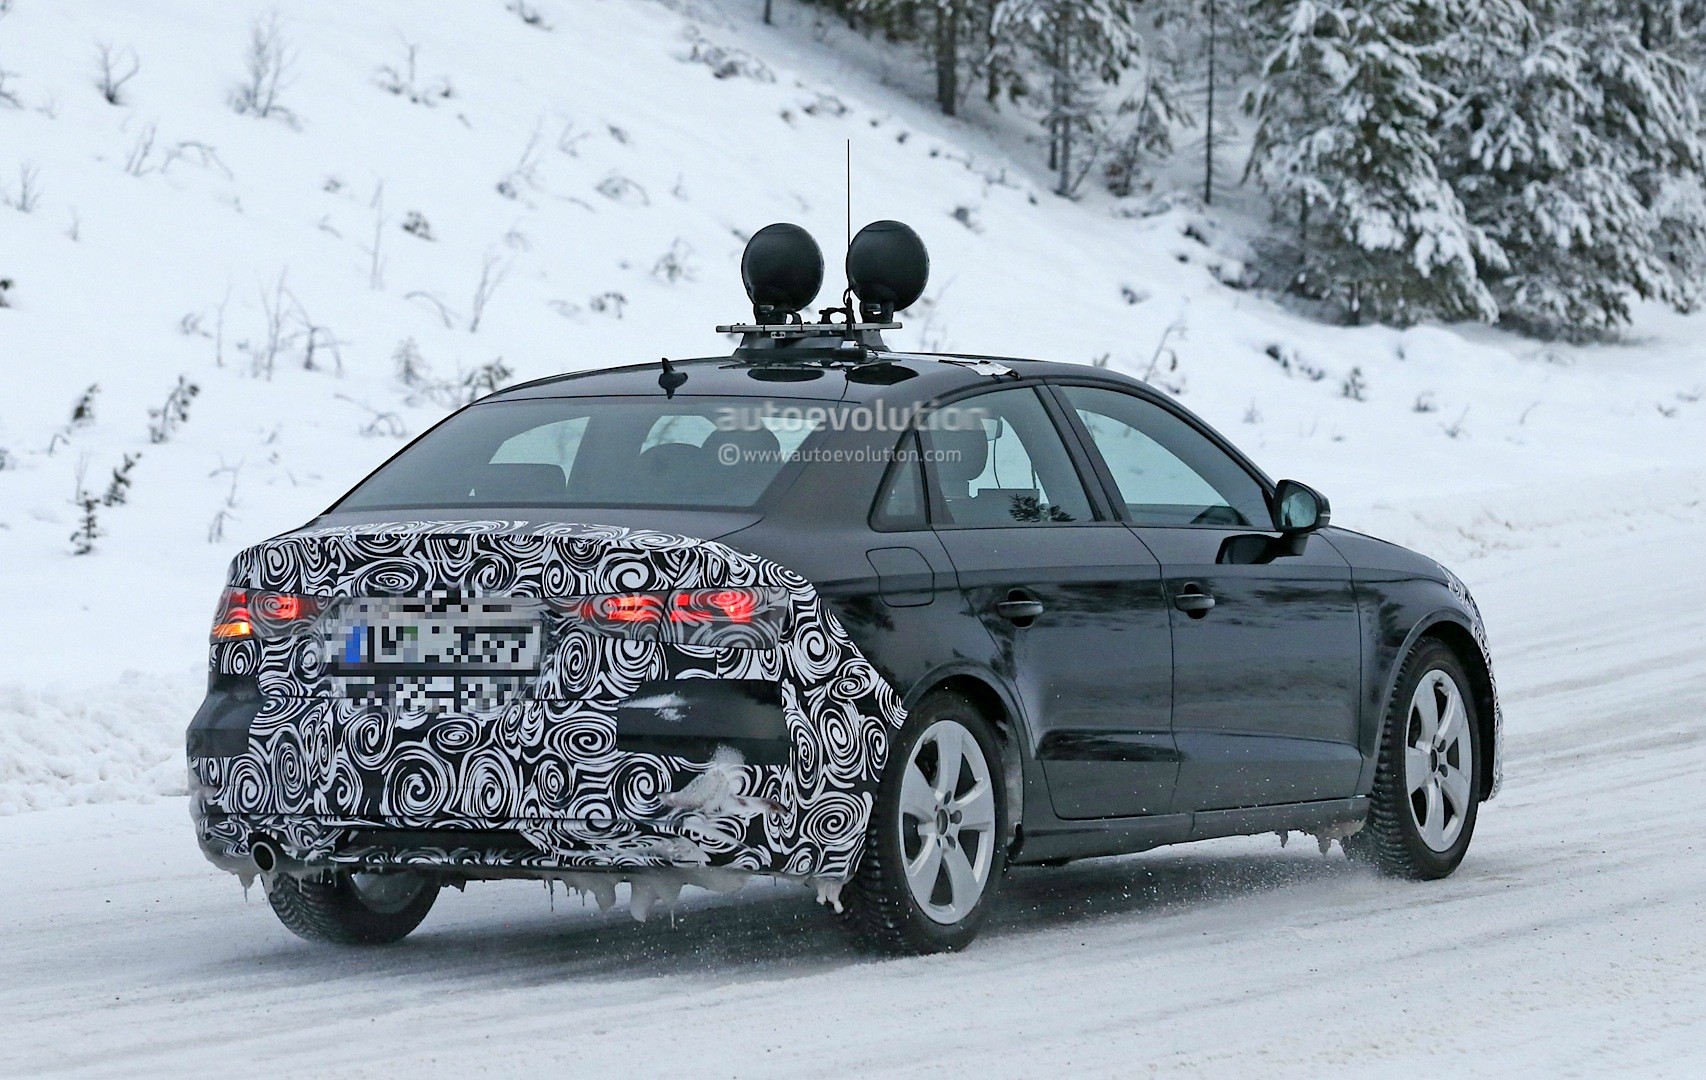 2016 Audi A3 Sedan Facelift Spied for the First Time Starts 